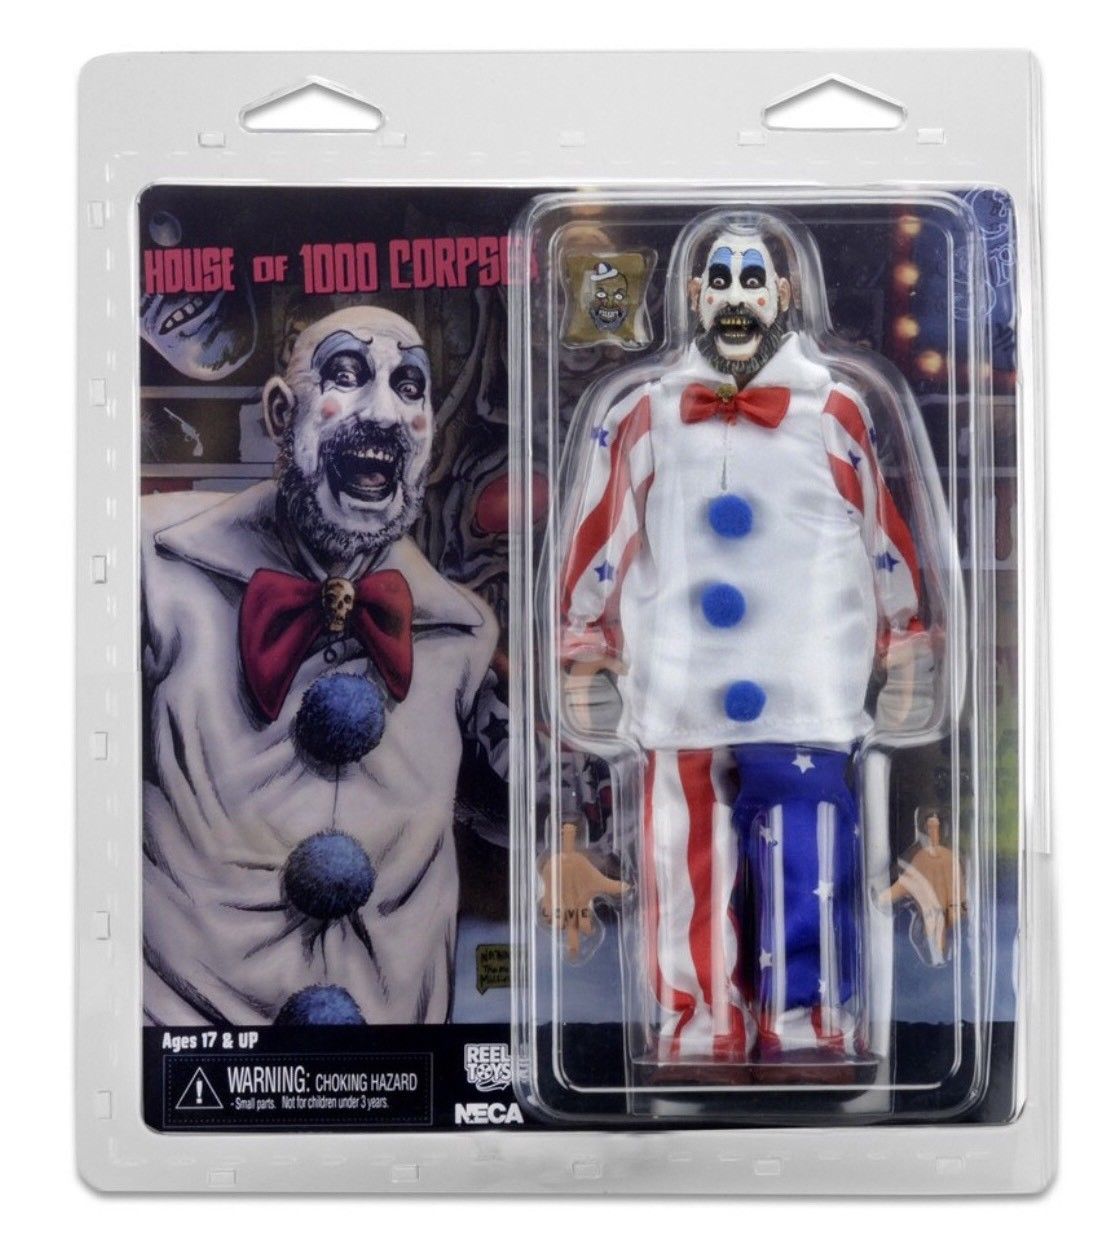 NECA Captain Spaulding House of 1000 Corpses - 8" Scale Clothed Figure - Collectors Row Inc.